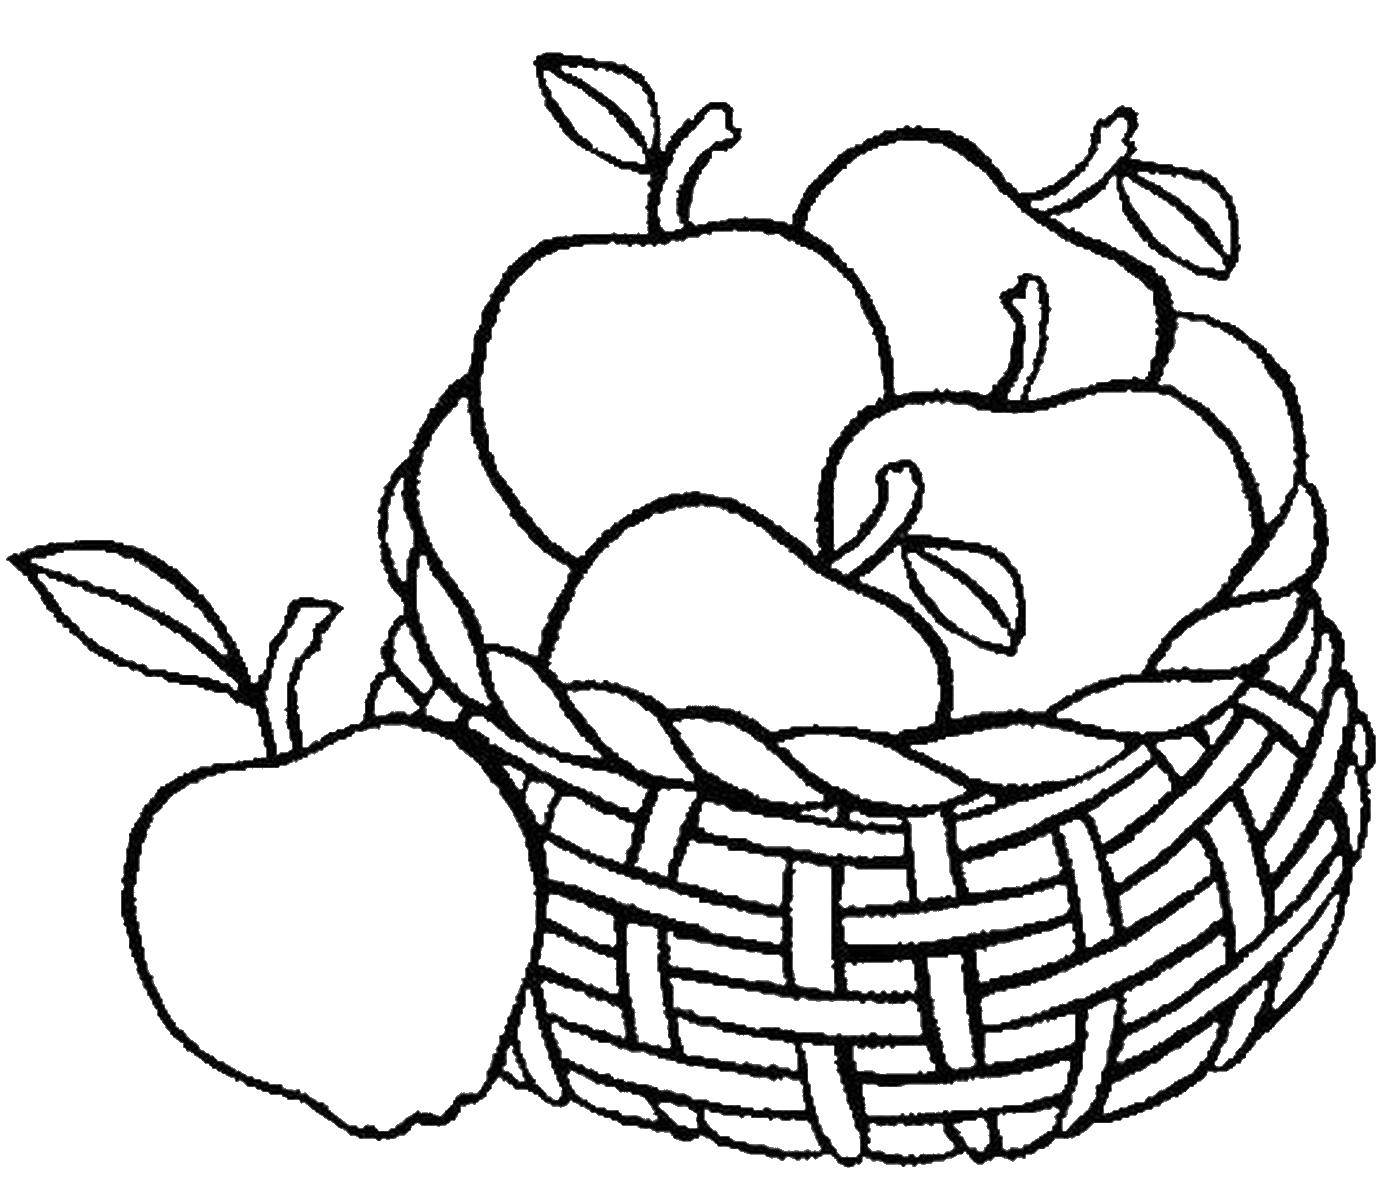 Coloring Apples in the basket. Category fruits. Tags:  Apple, fruit.